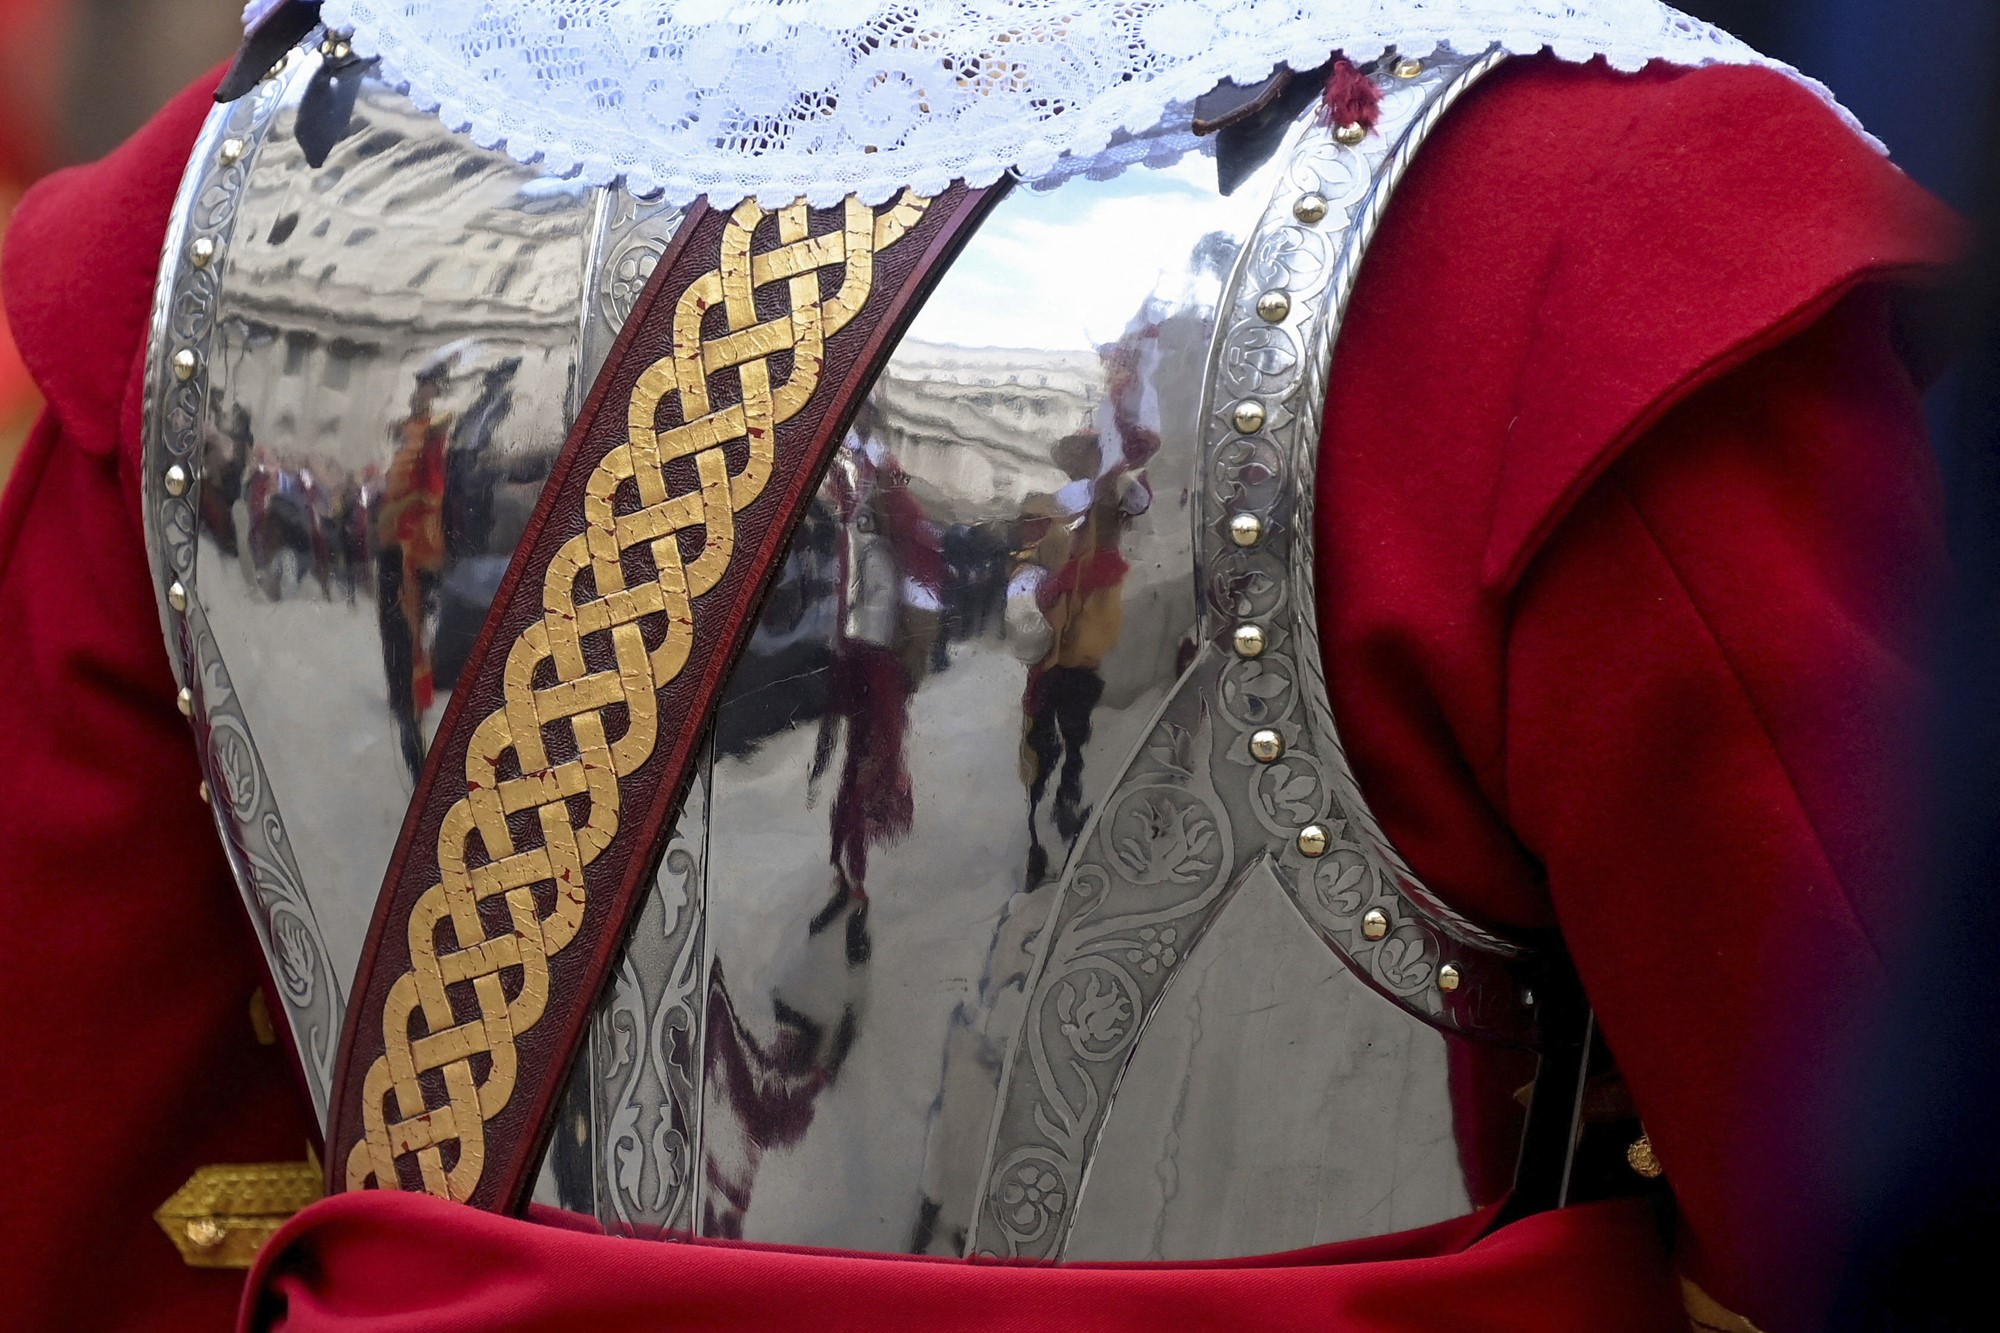 Pikemen and musketeers are reflected in the uniform armour plate of a member of the Honourable Artillery Regiment